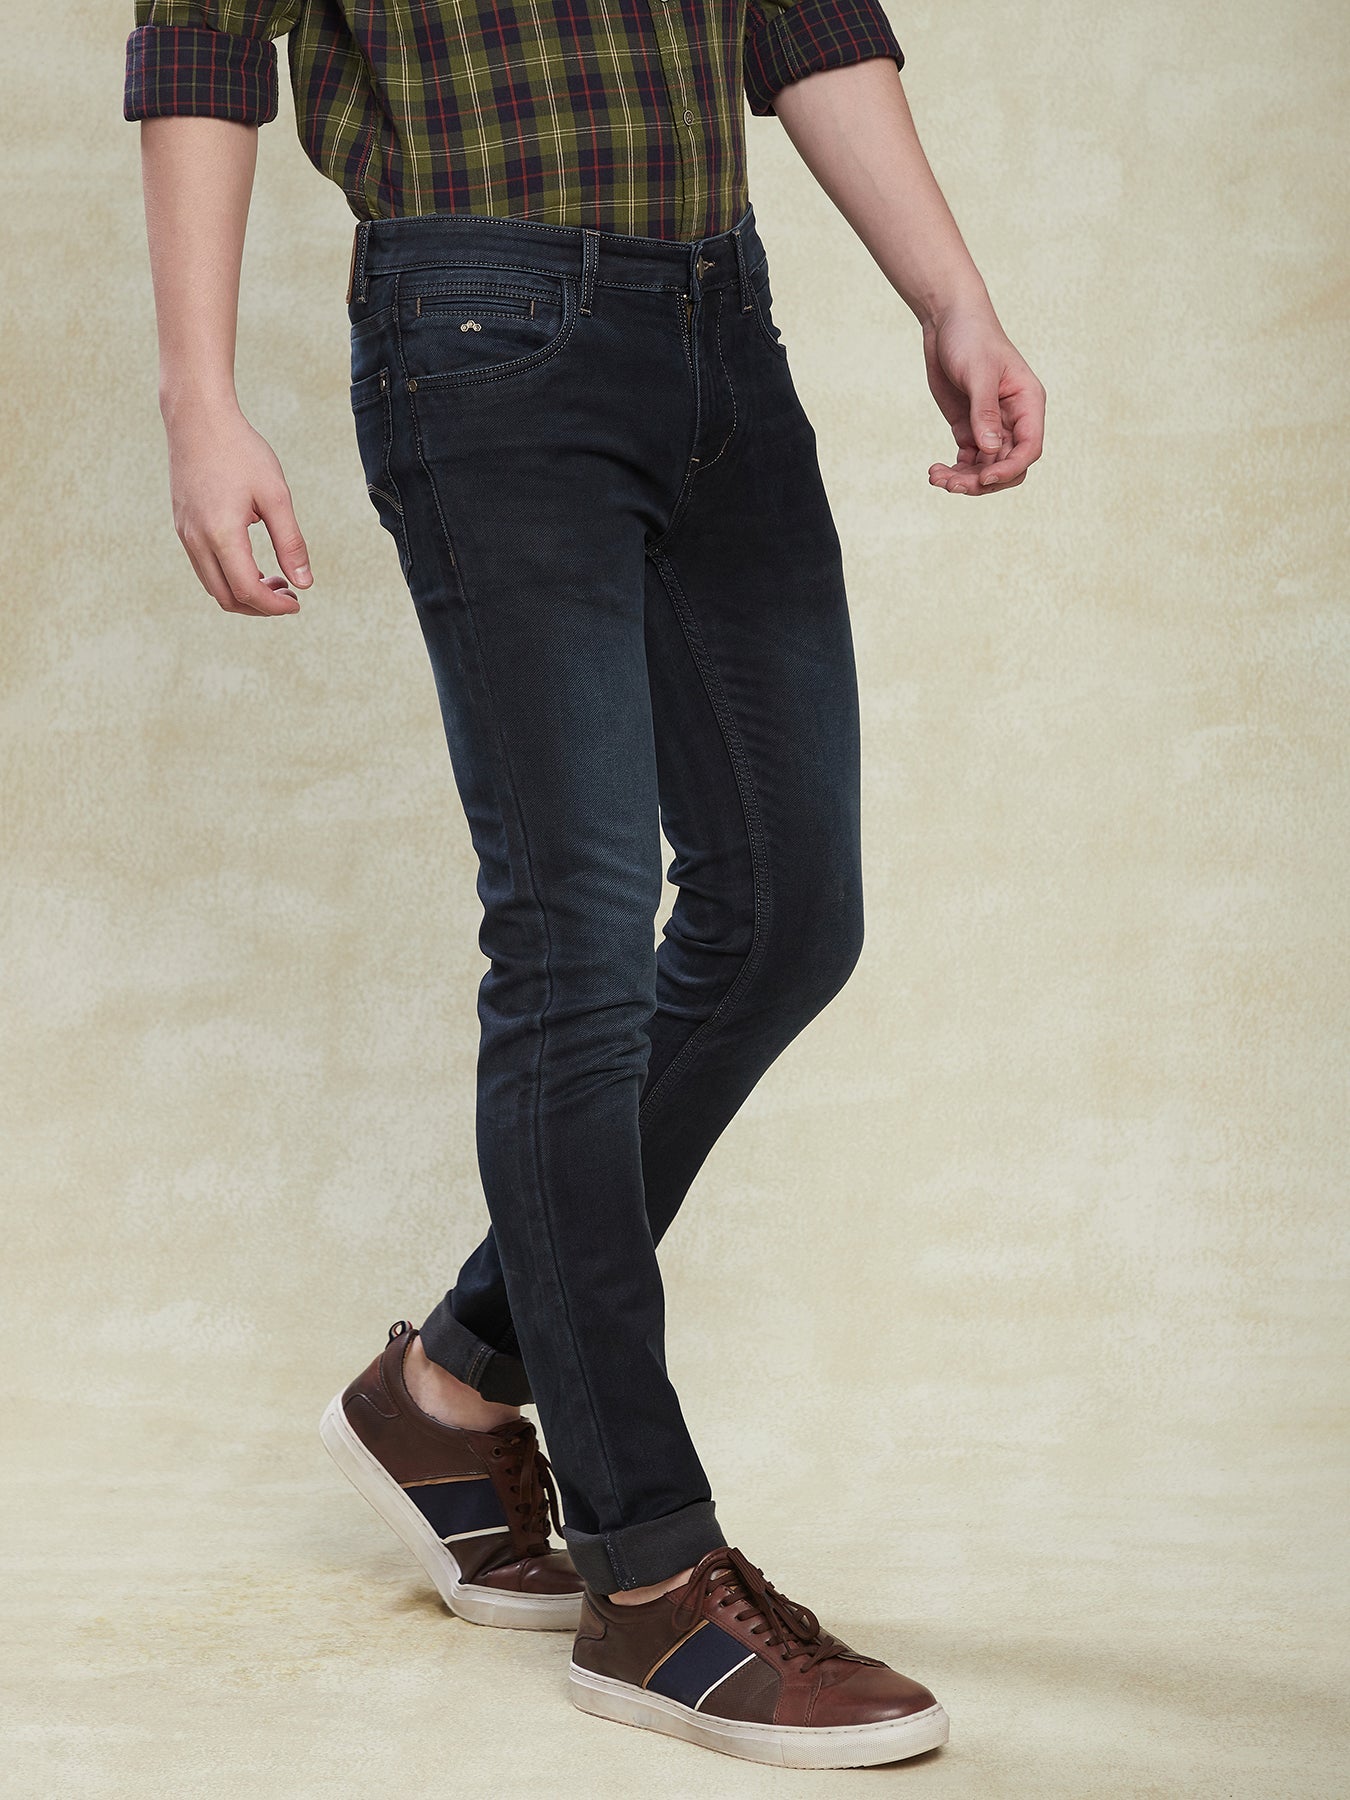 cotton-stretch-navy-blue-narrow-fit-flat-front-casual-mens-jeans